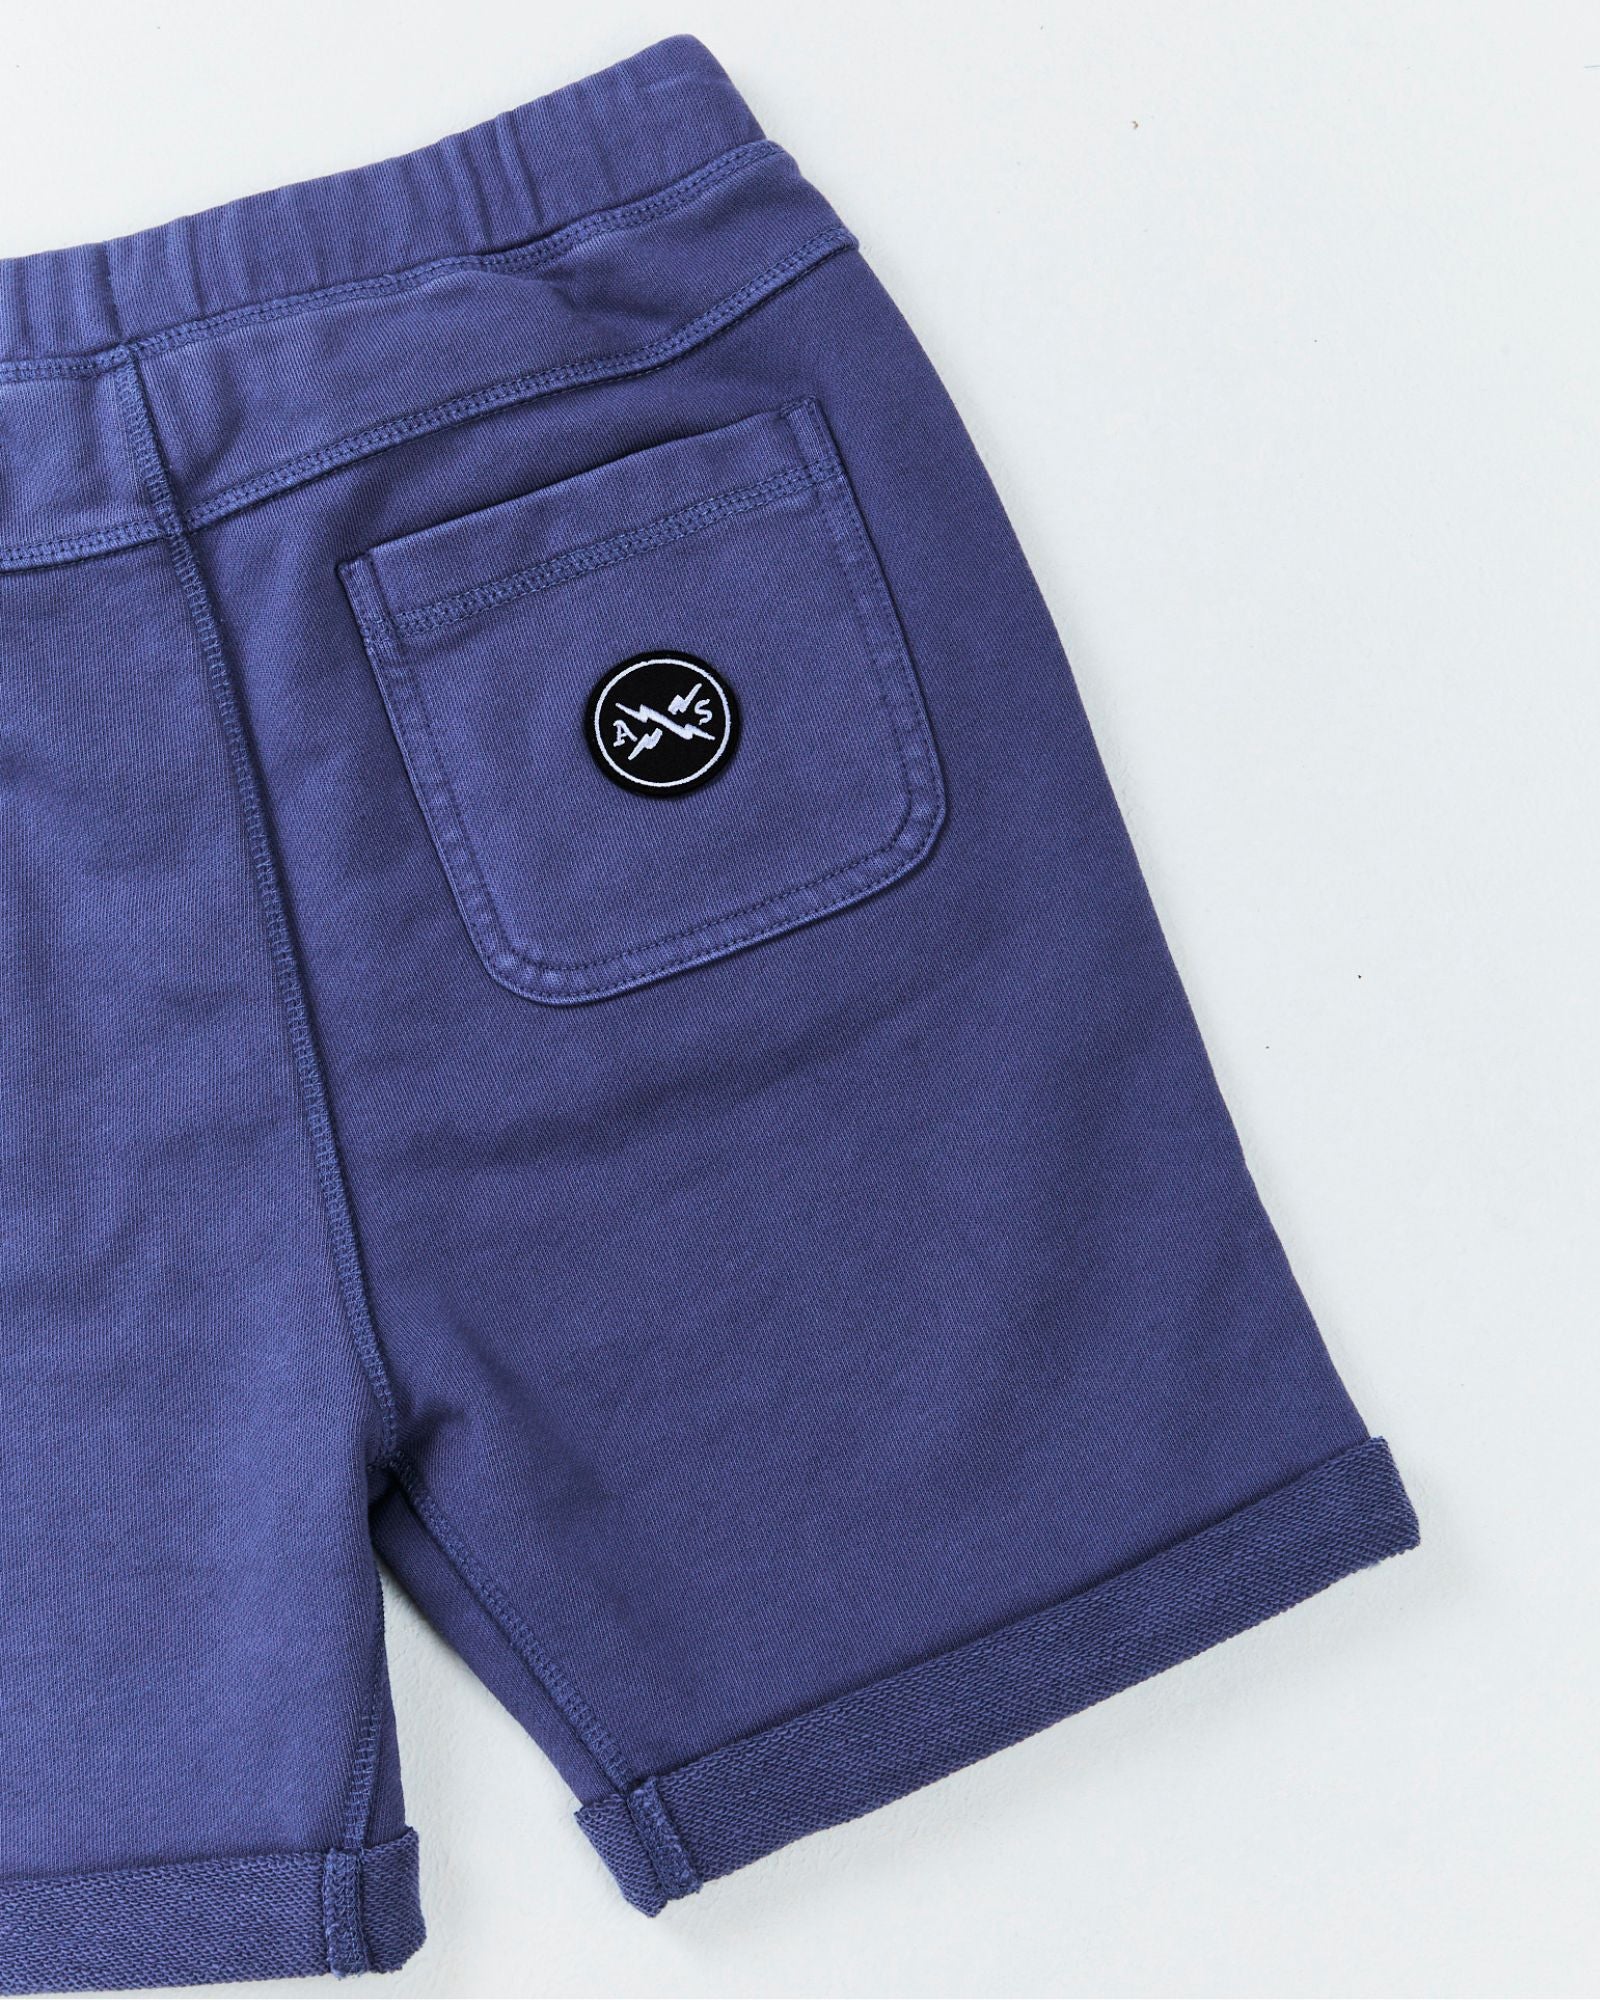 Alphabet Soup's Teen Comfy Shorts for boys aged 8-16. Featuring pigment dye print, heavy weight cotton, adjustable drawcord waist, rolled hem, faux fly, twin hand pockets, embroidered front pocket, back pocket logo patch.